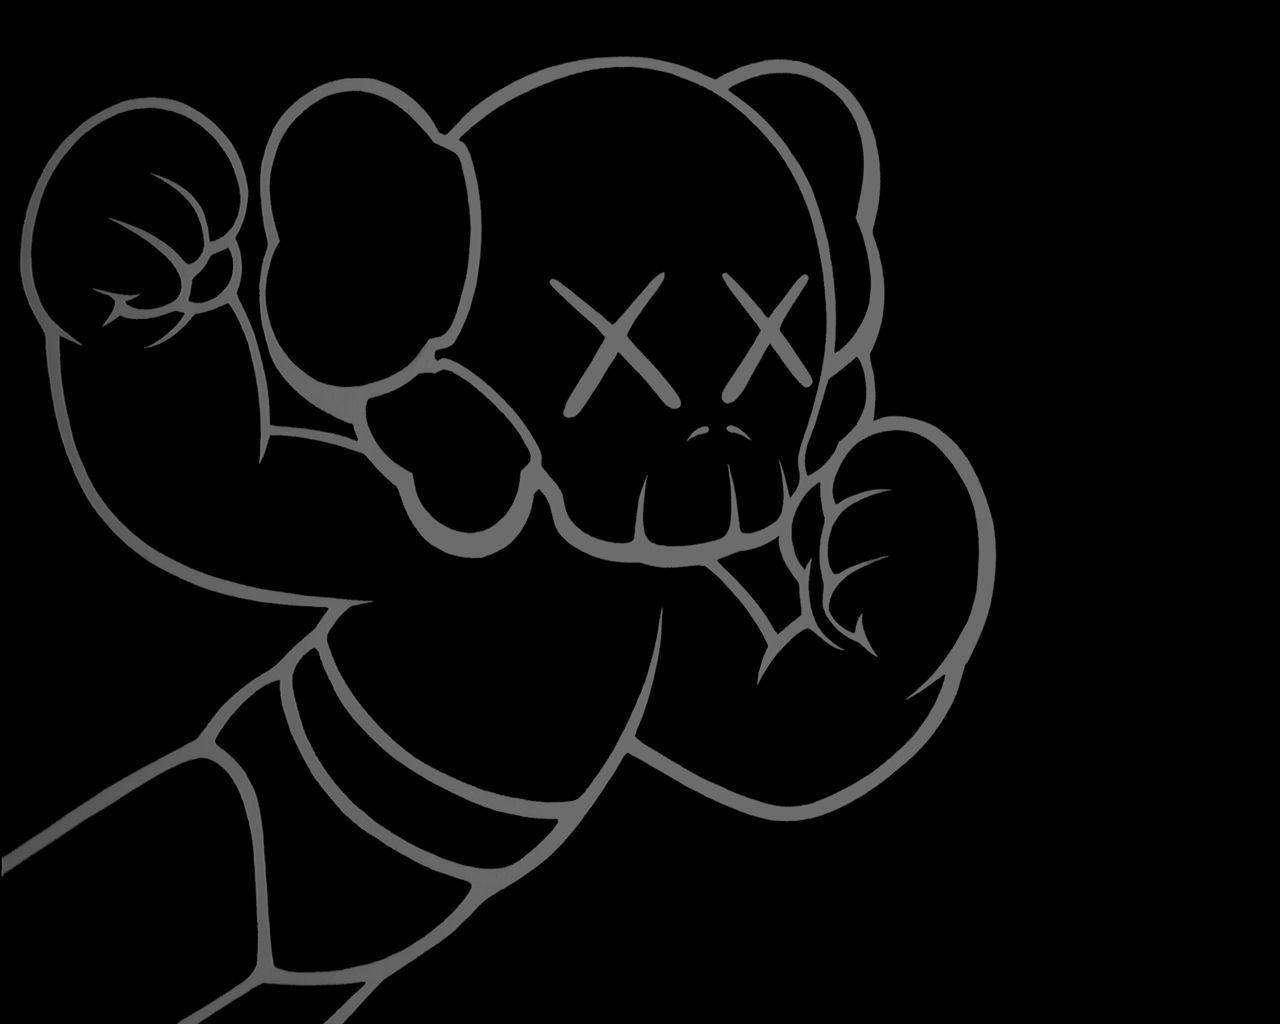 Black And White Strong Kaws Pc Wallpaper